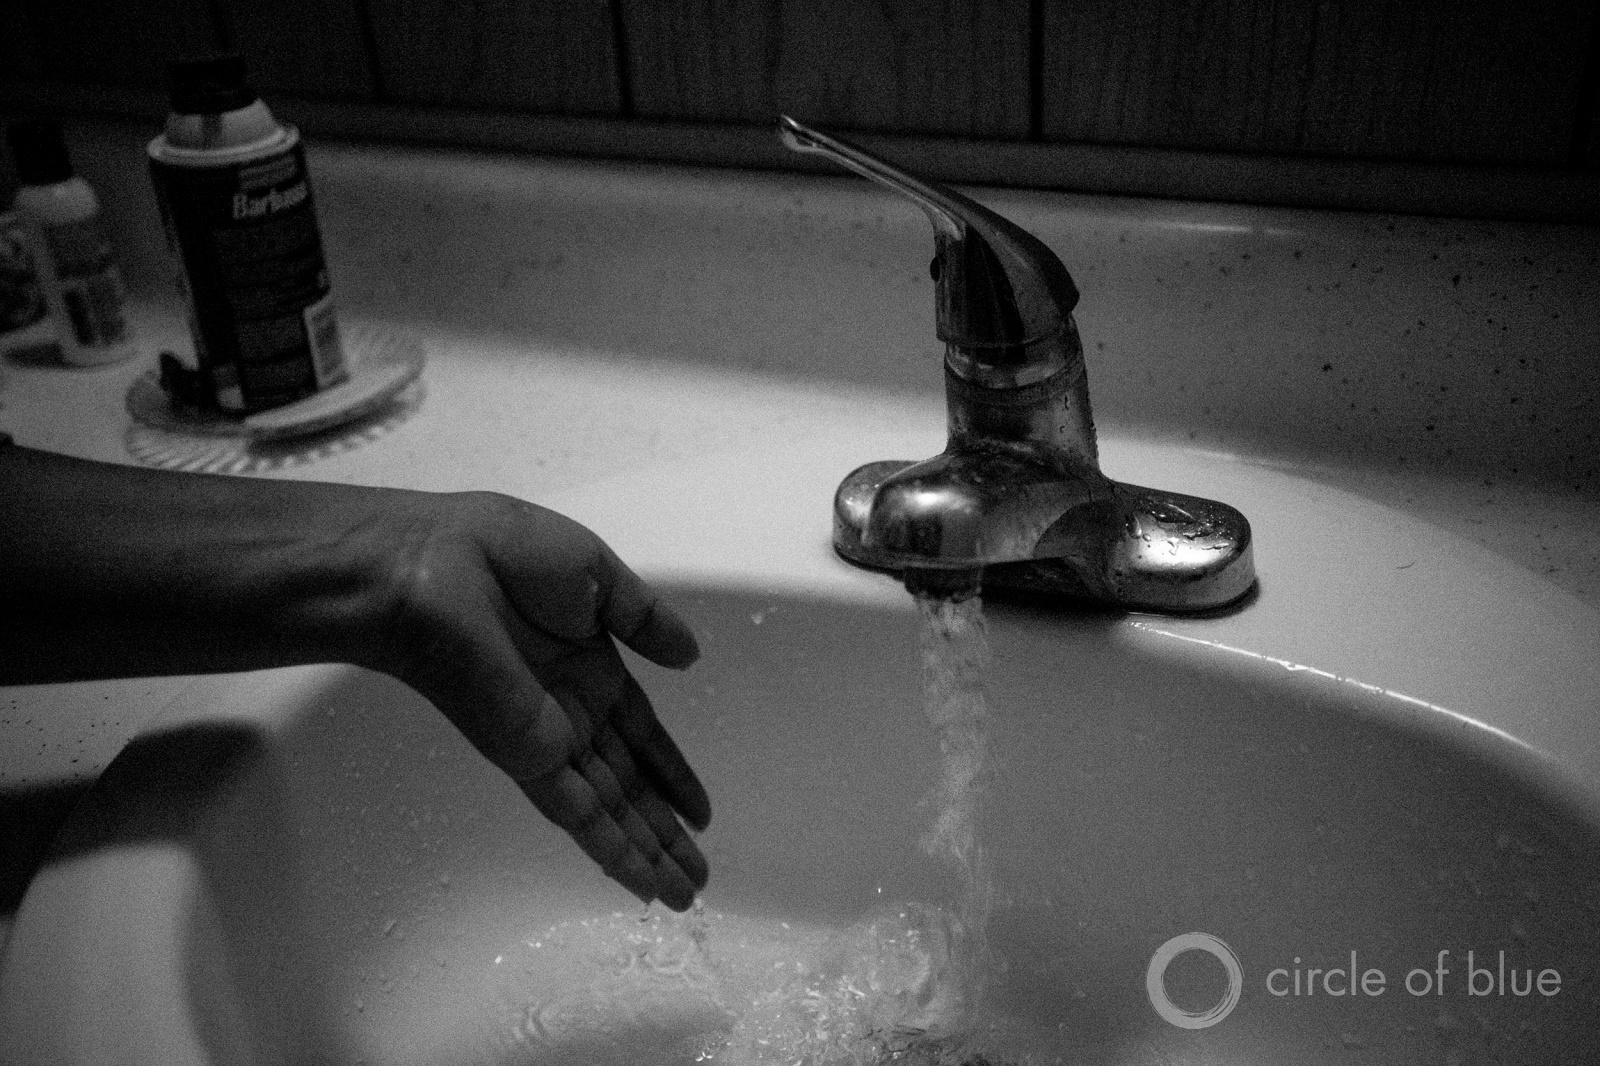 Gabriela Rodriguez prepares to give her baby a bath at their home in Kettleman City, in California's San Joaquin Valley. Many residents of this small farmworker community fear their water supply after a rash of defects struck the town. Photo © Matt Black for Circle of Blue